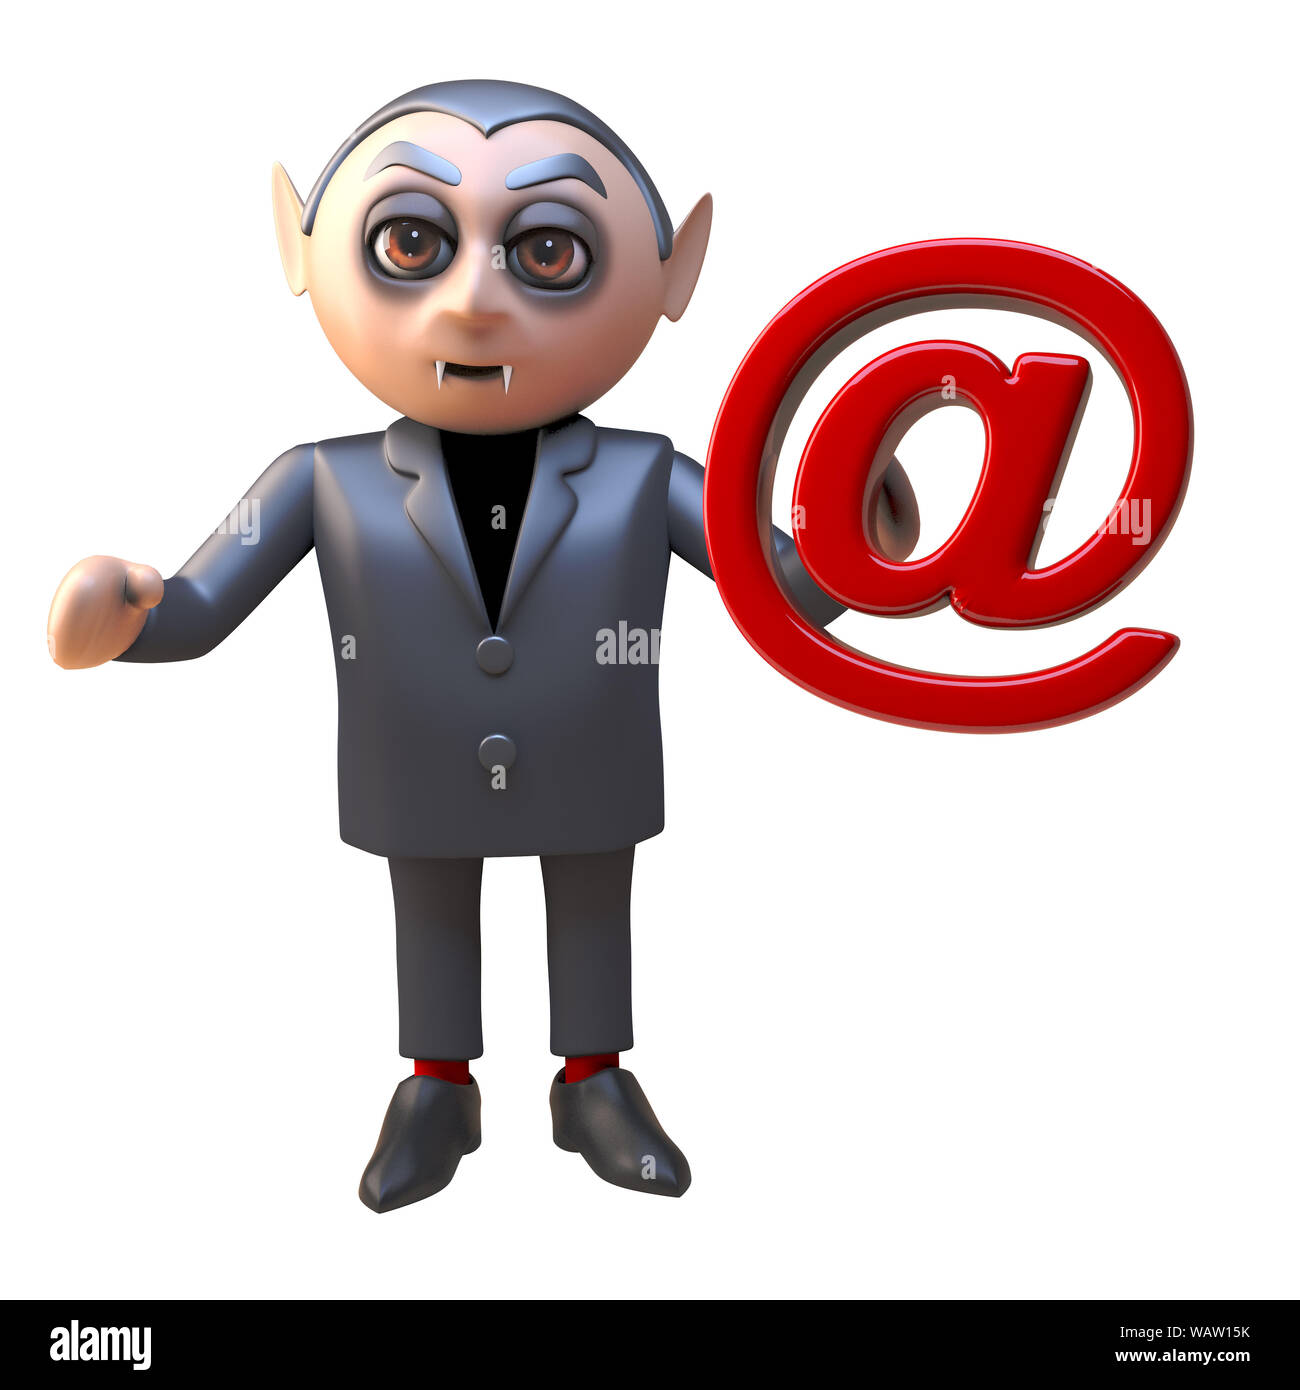 Funny cartoon 3d vampire dracula monster character holding an email address  symbol, 3d illustration render Stock Photo - Alamy